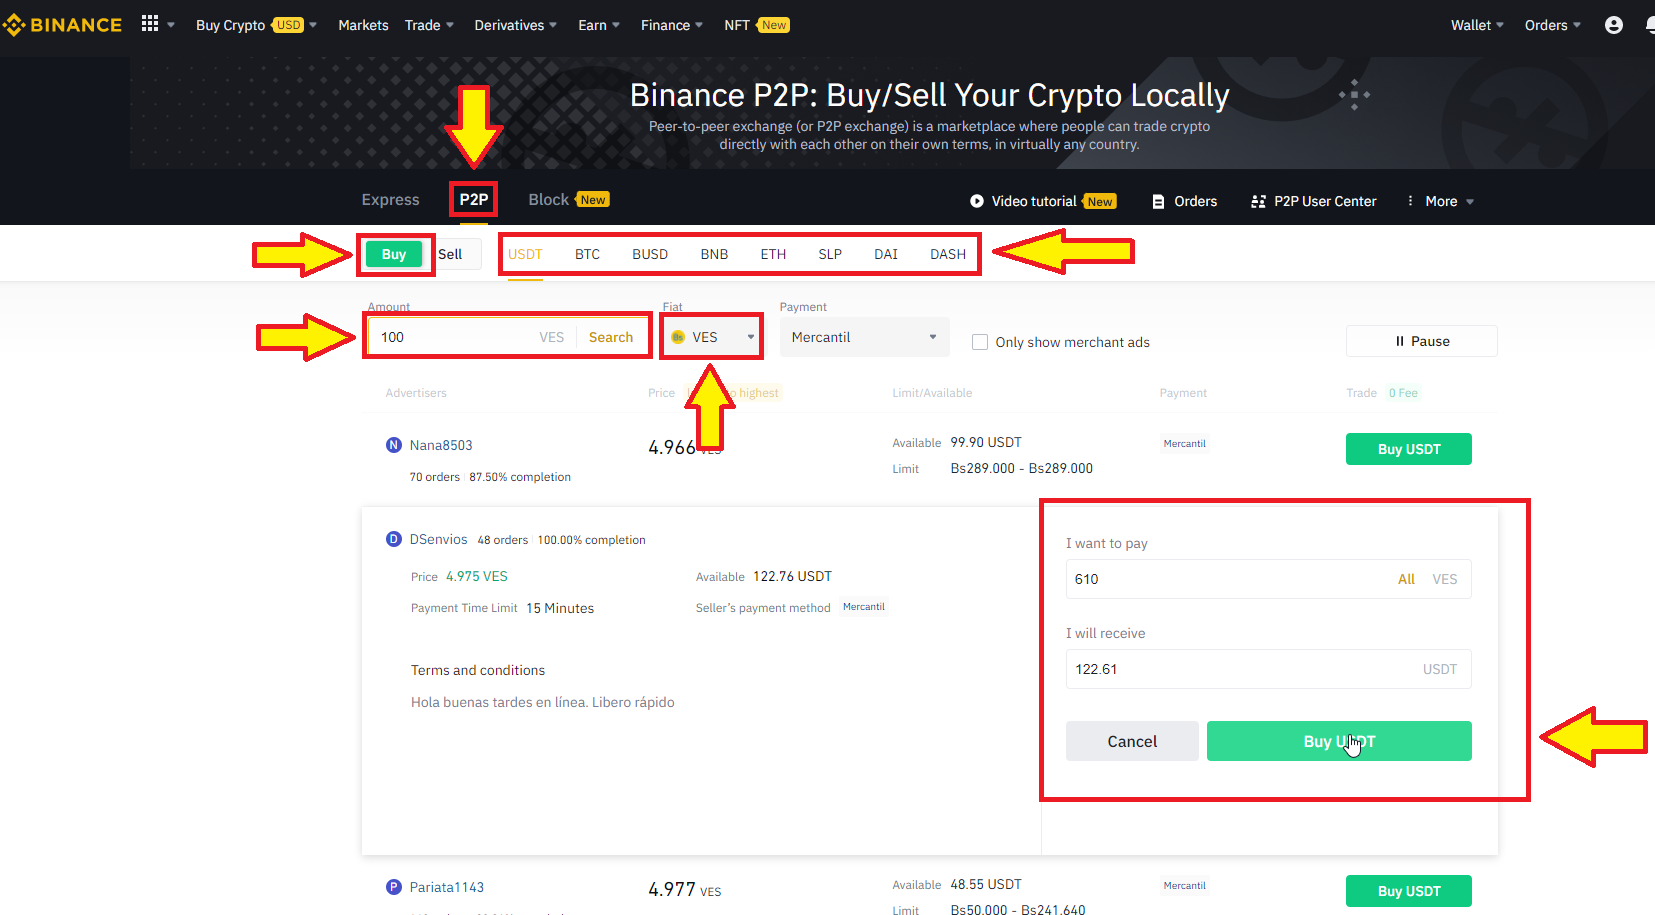 Buy Wilder World crypto in P2P with a verified account on Binance